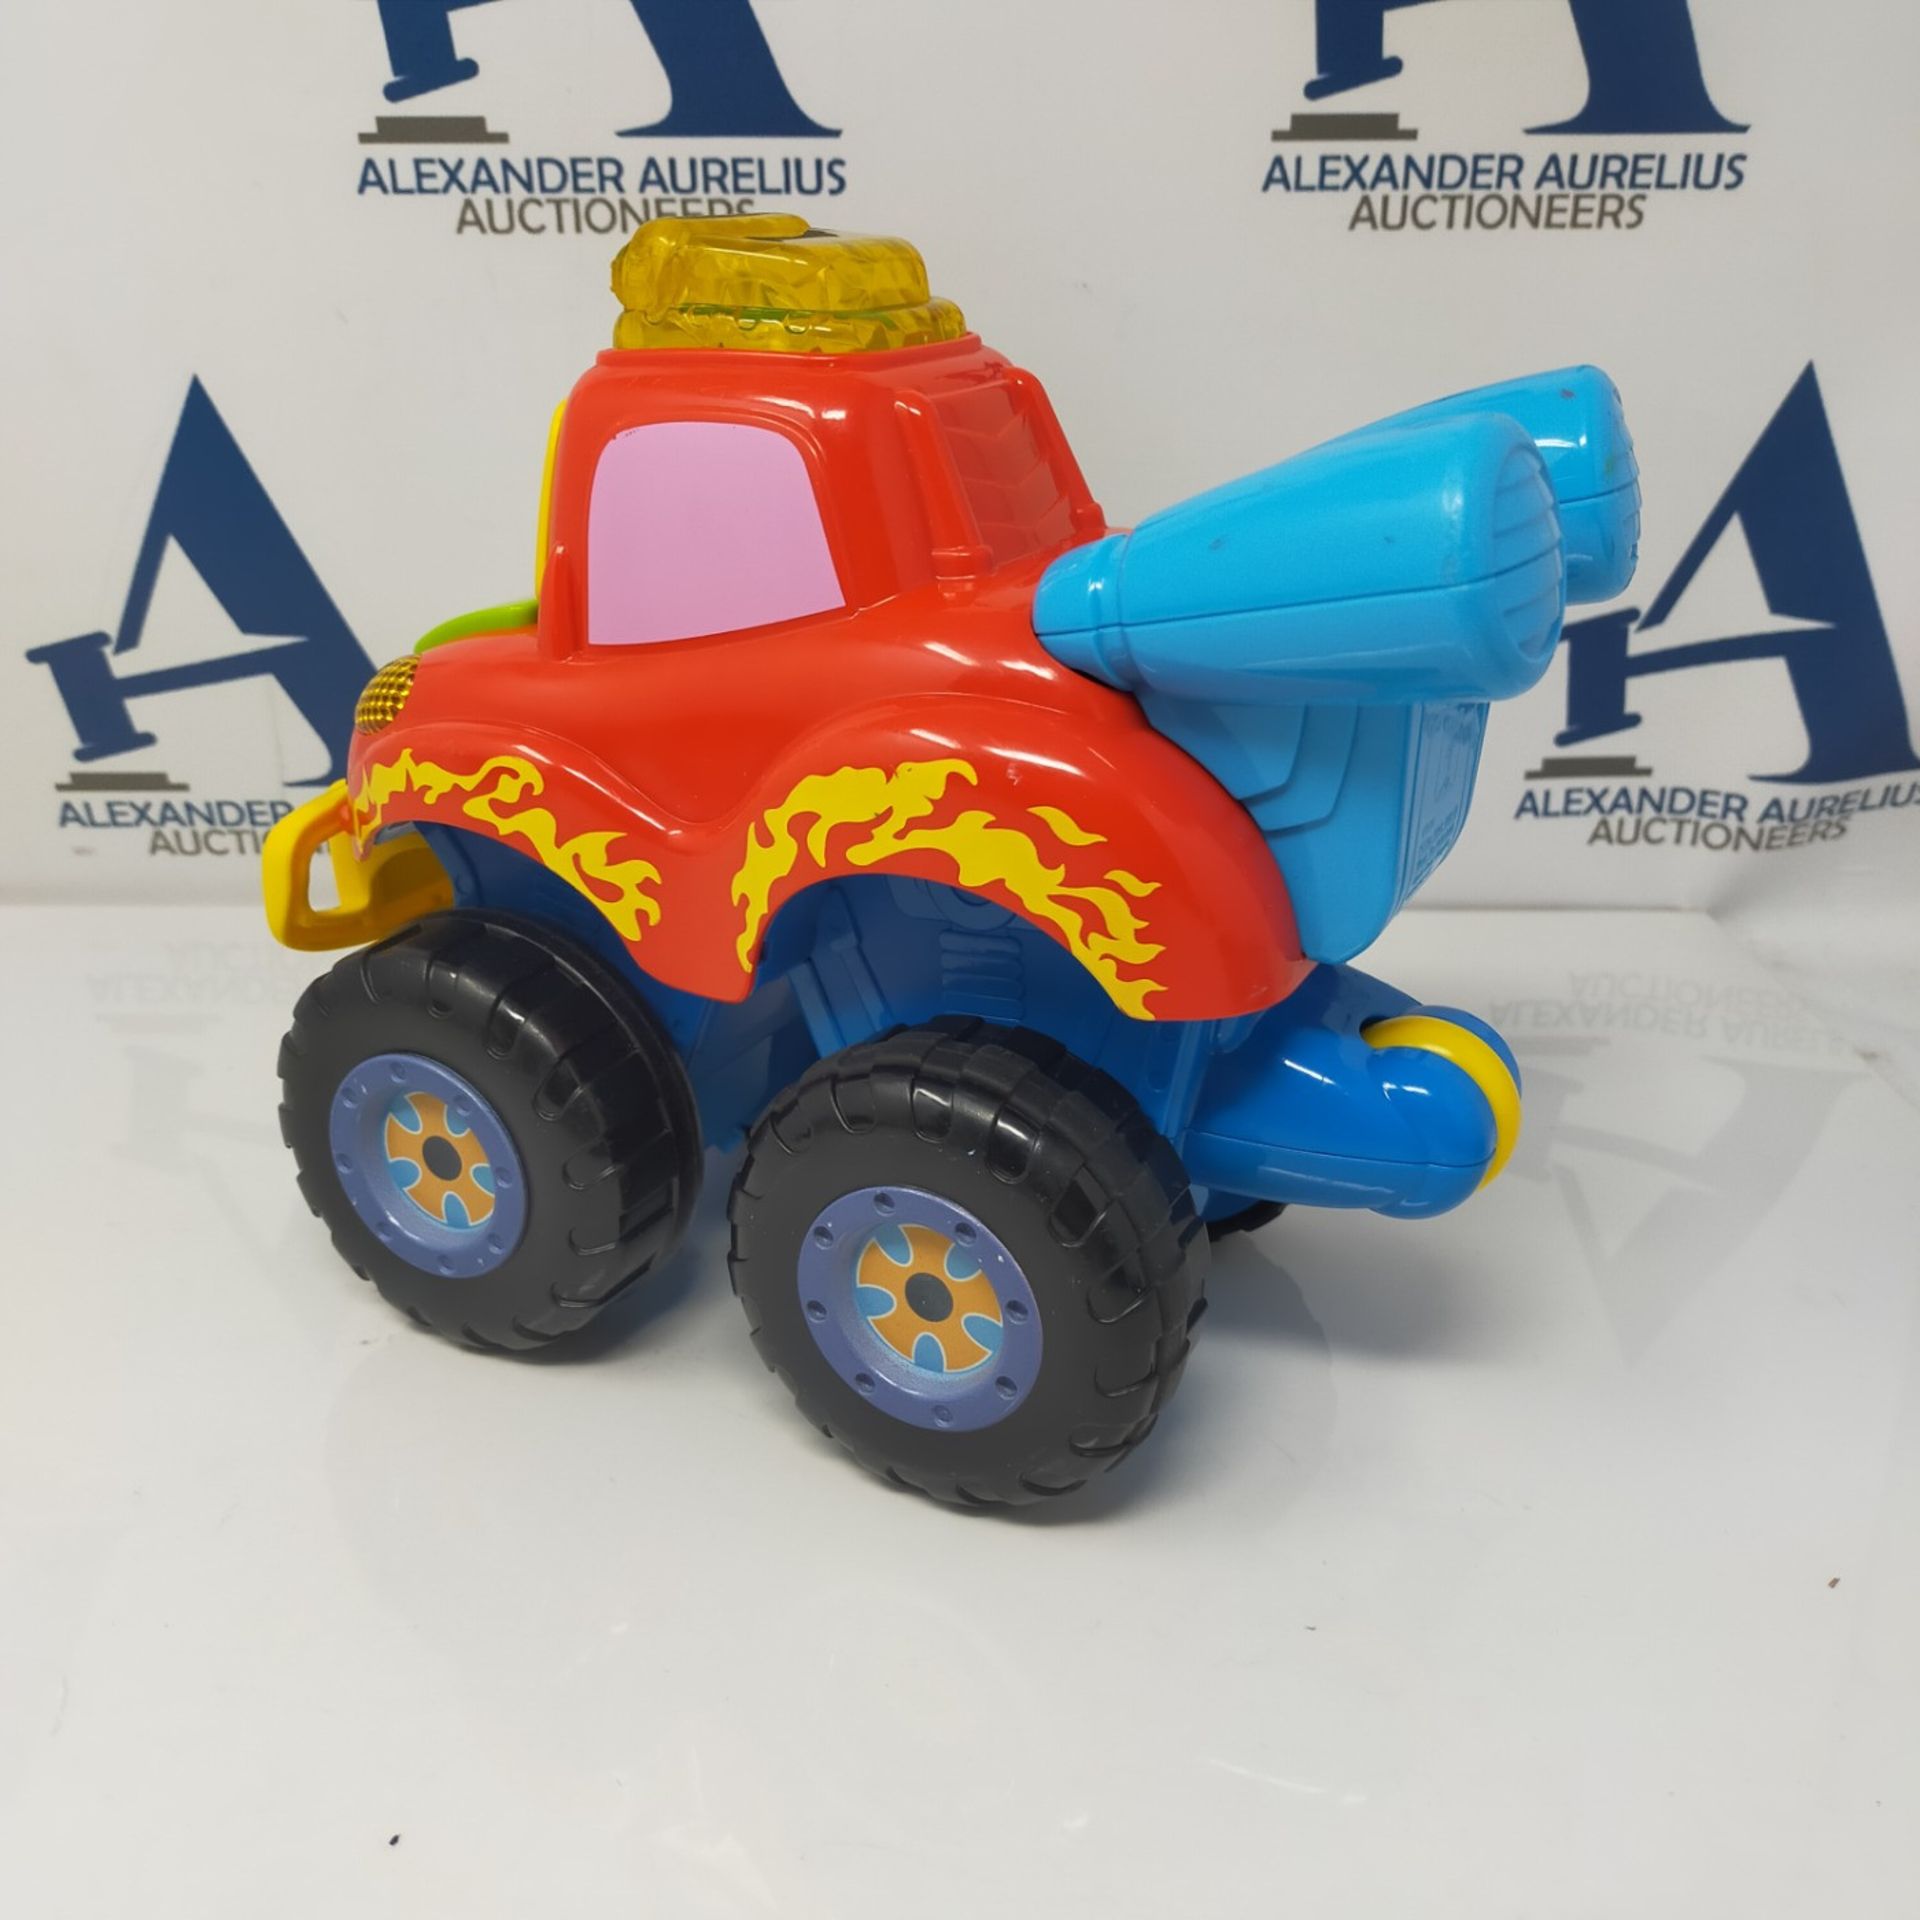 VTech 546405 Interactive Vehicle, Multicolored - Image 2 of 2